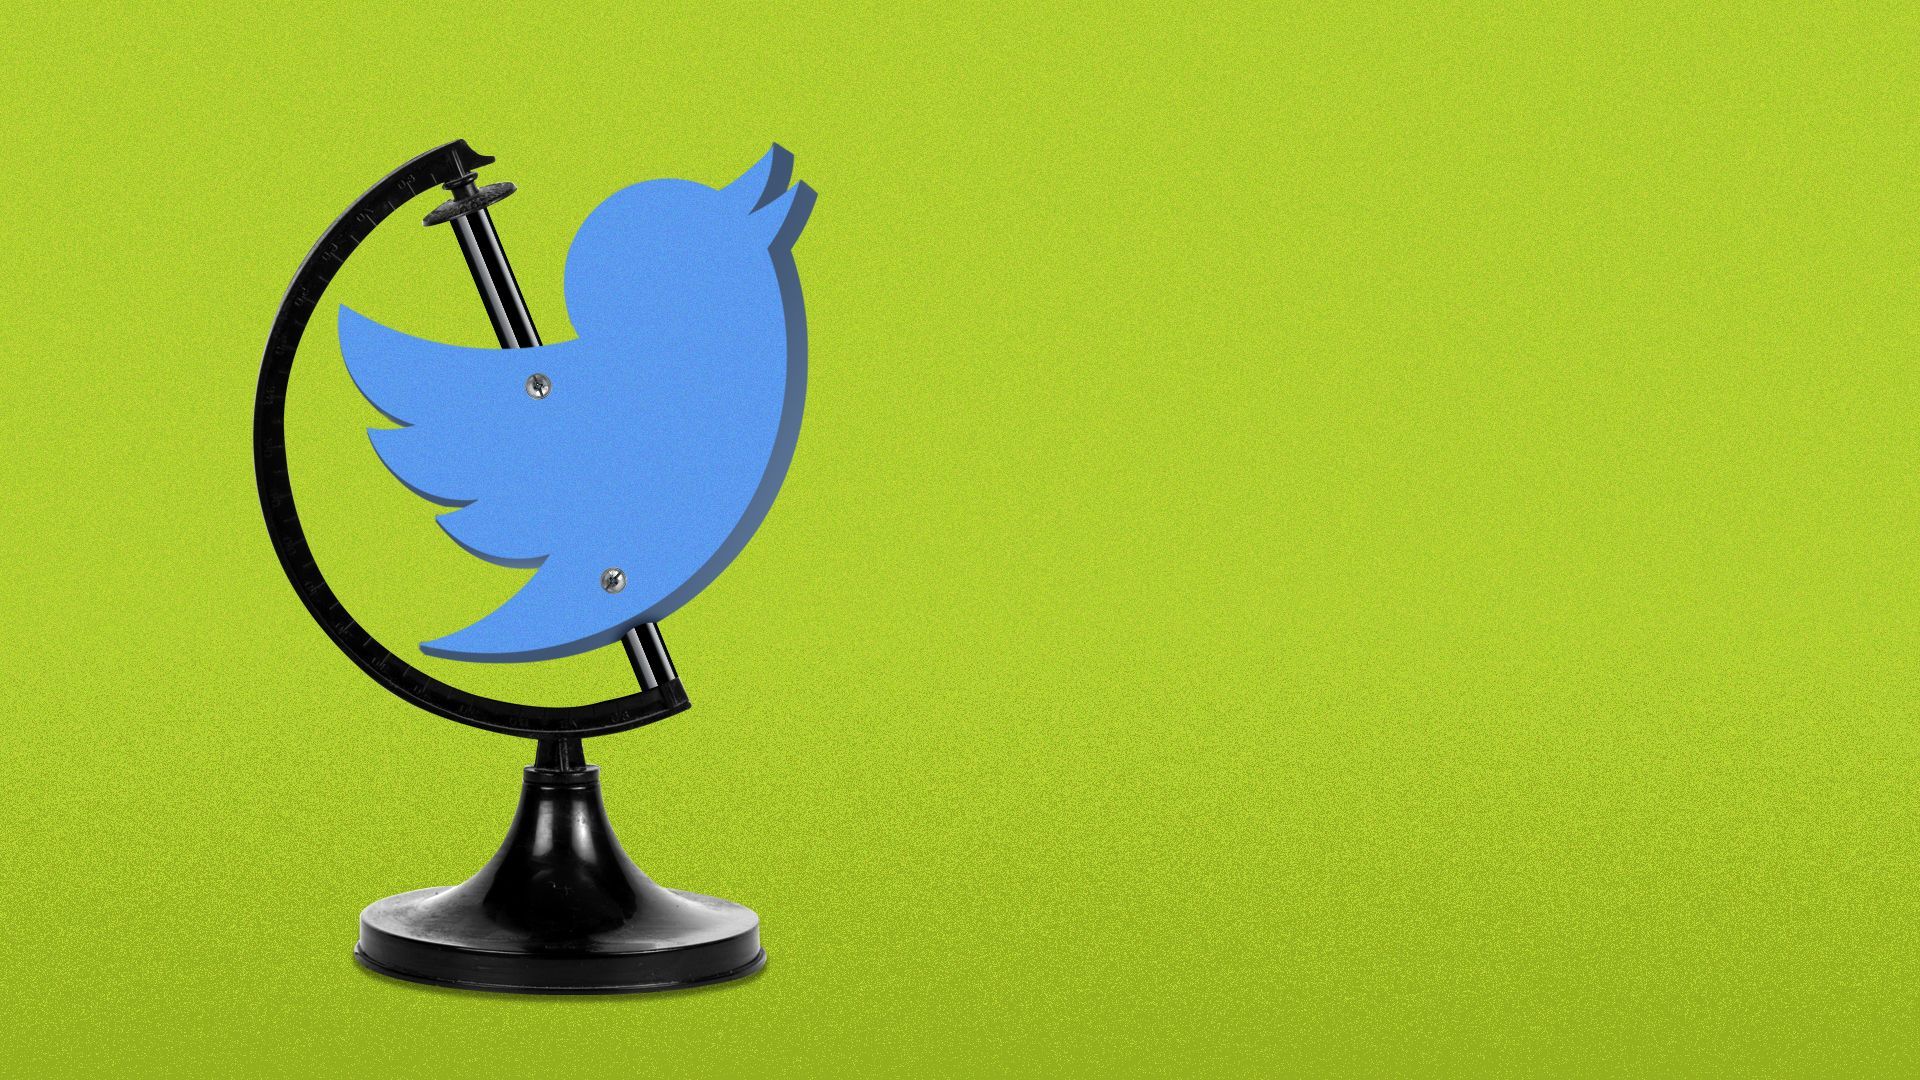 Illustration of the Twitter logo in a globe stand.